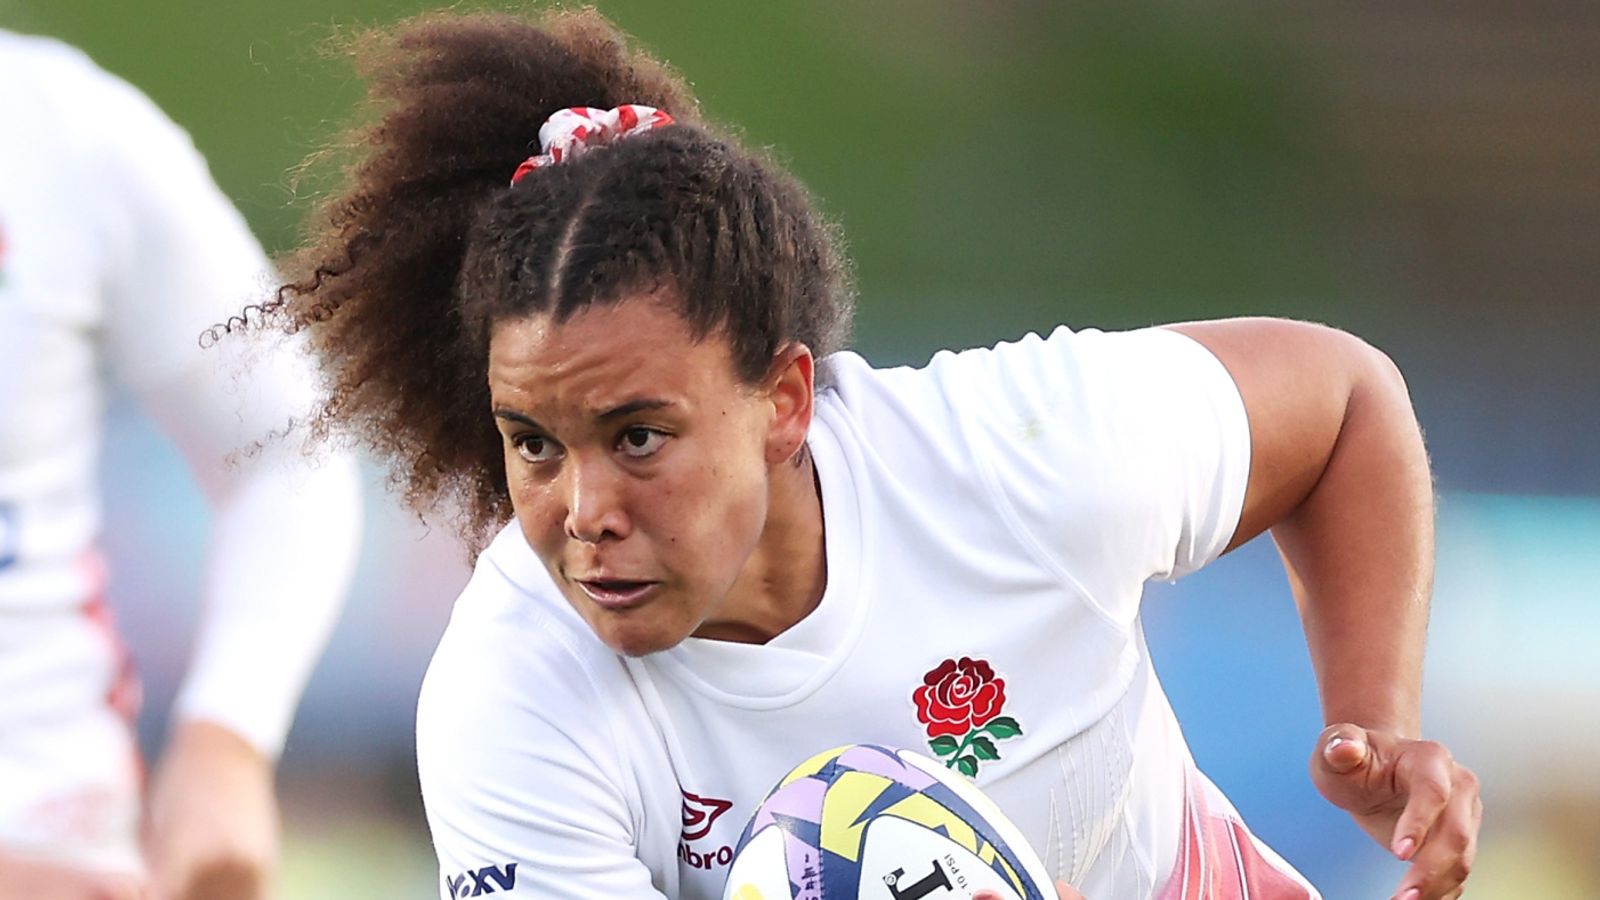 England’s Red Roses to face New Zealand in September at Twickenham ahead of WXV 1 title defence in Canada | Rugby Union News